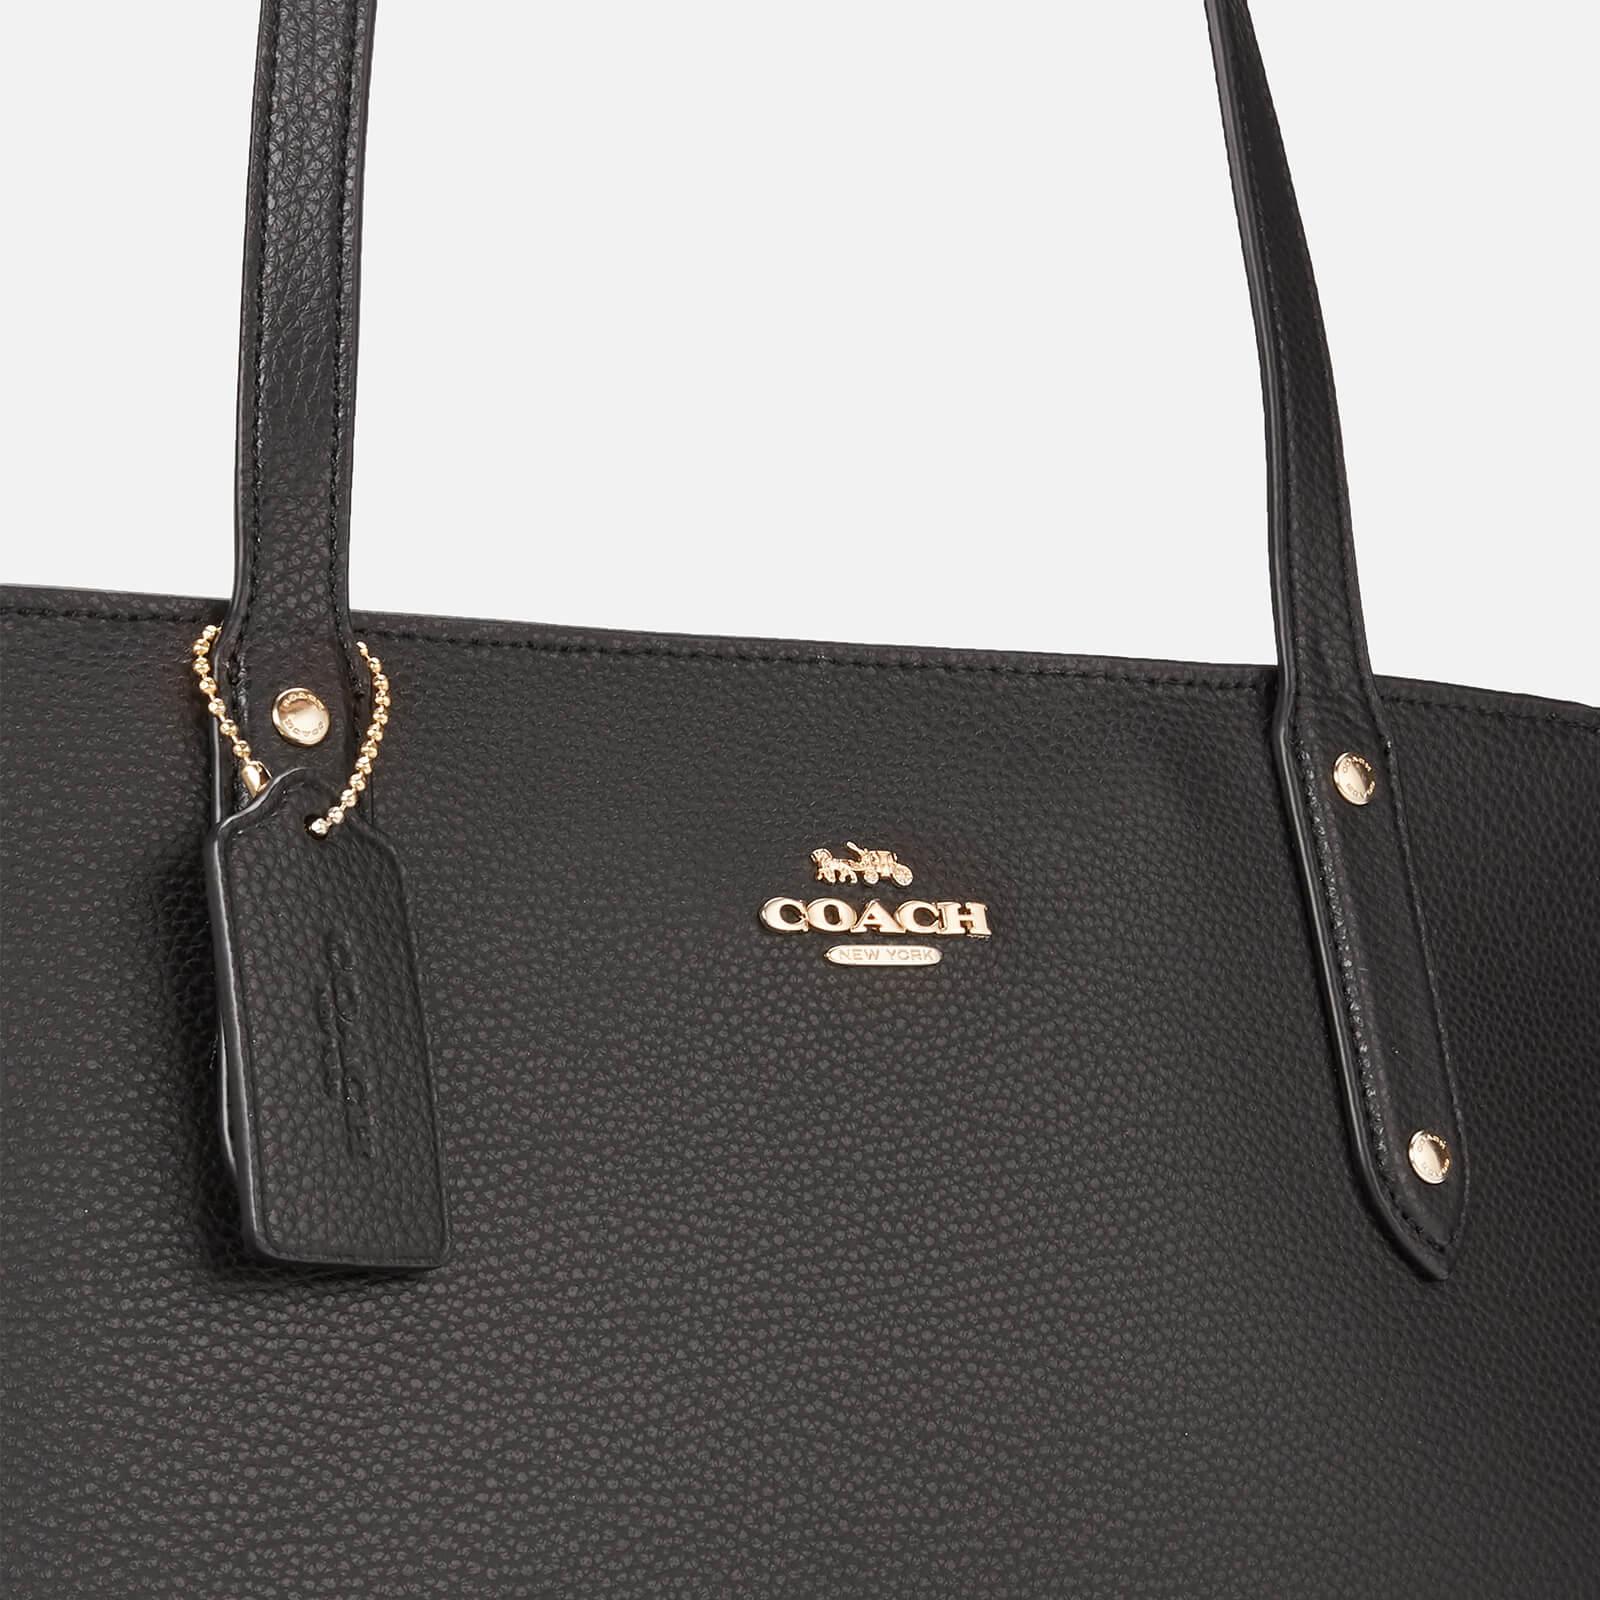 COACH Central Leather Zip Top Tote Bag in Black